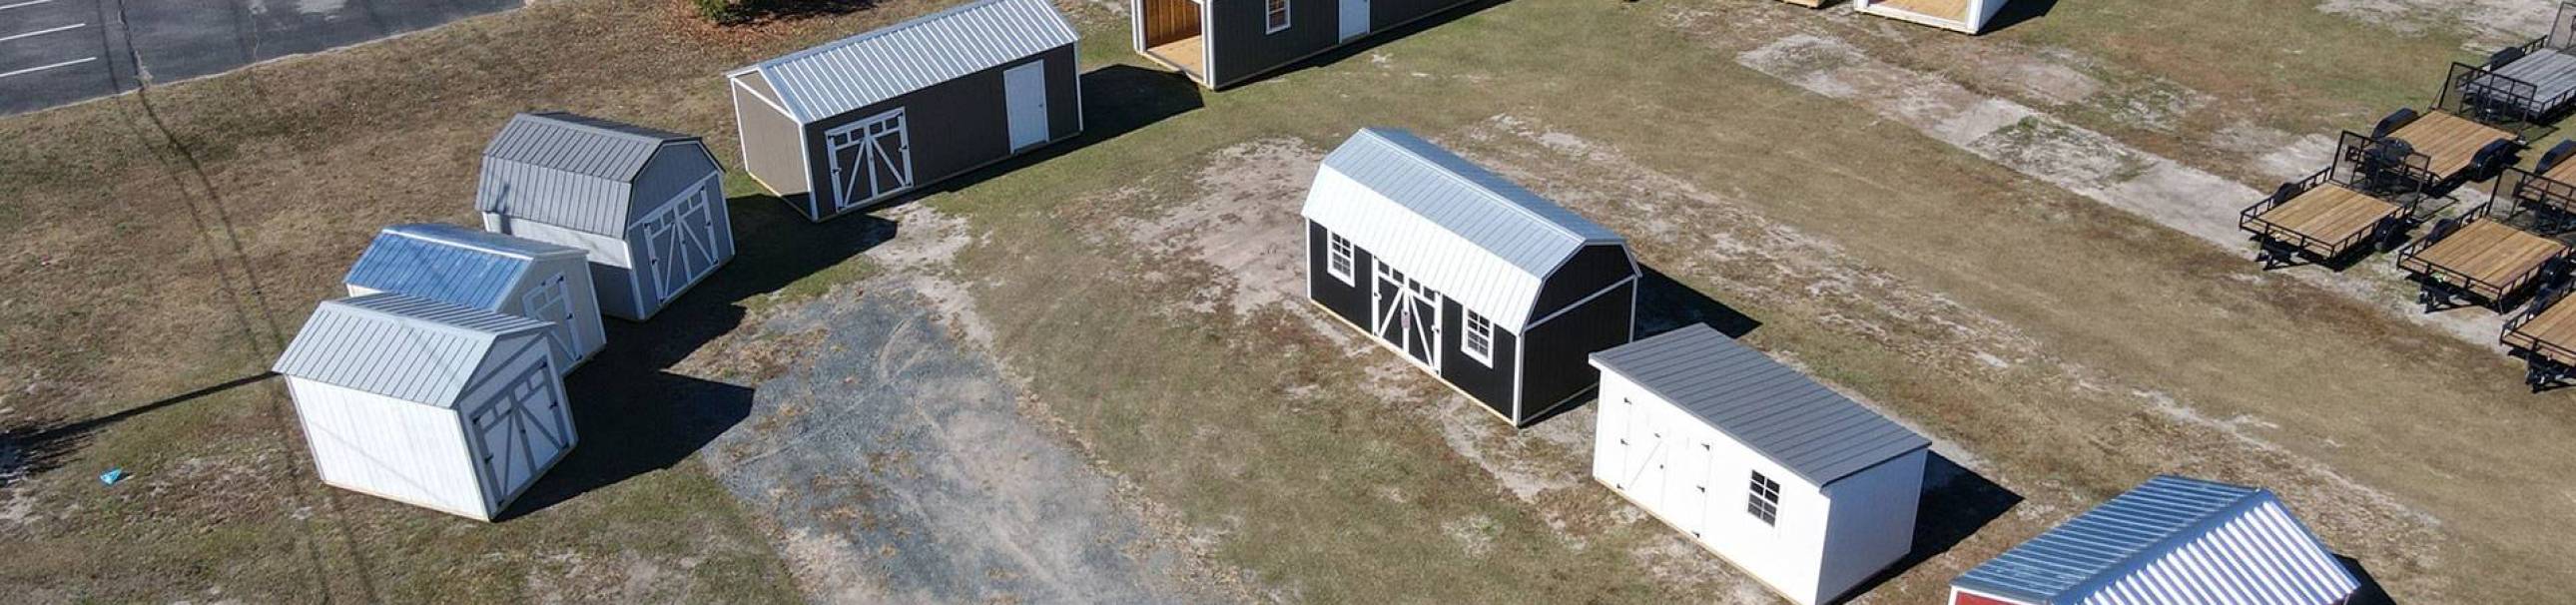 Aerial view of portable buildings sales lot